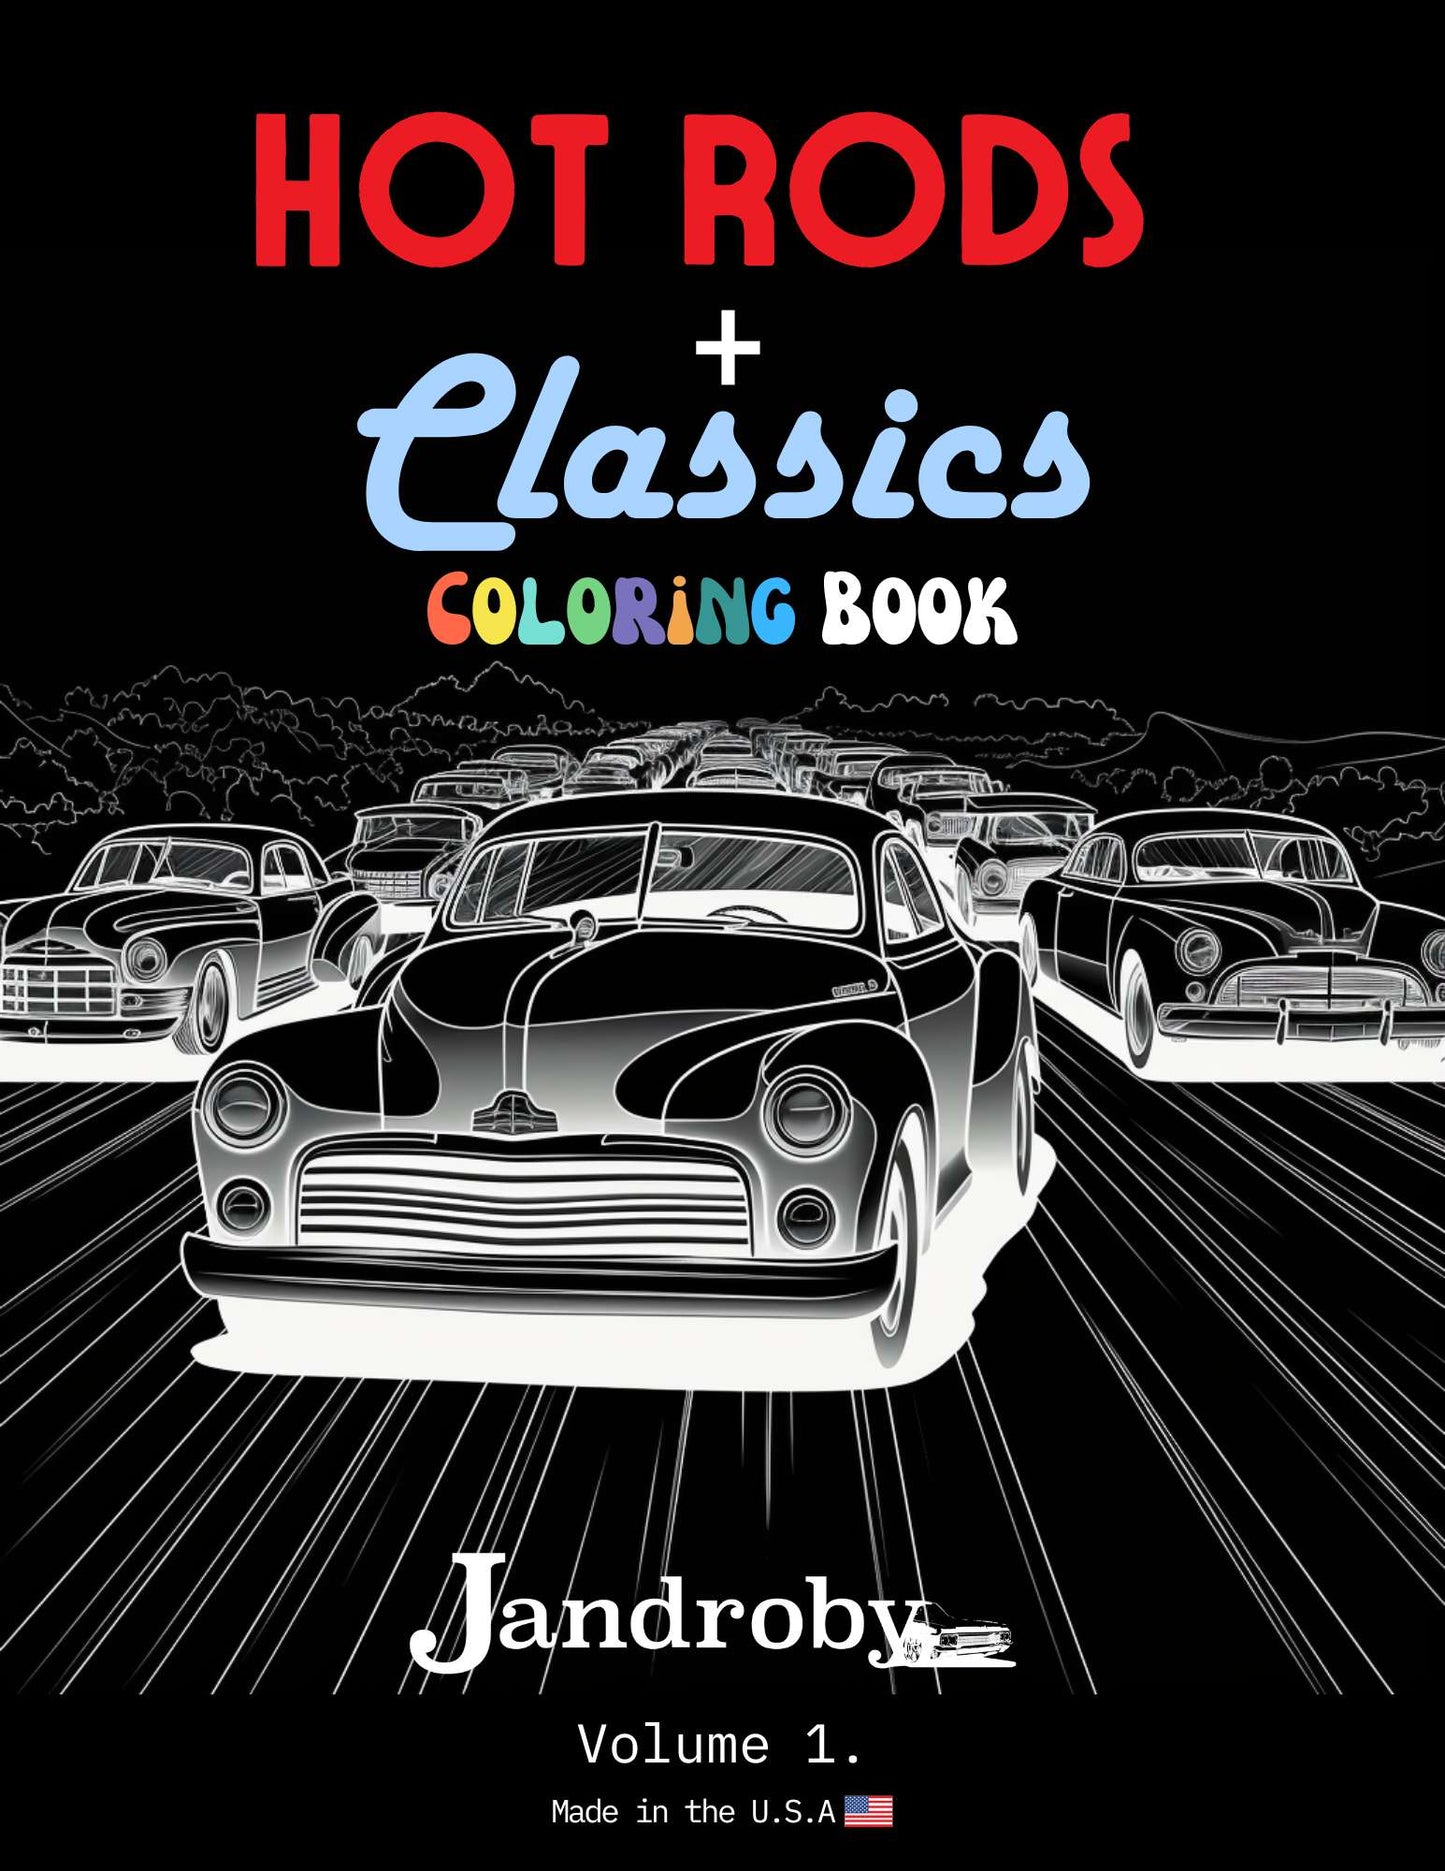 Cover design of the Jandroby Hot Rods and Classic Cars Coloring Book featuring a vintage hot rod car drawing